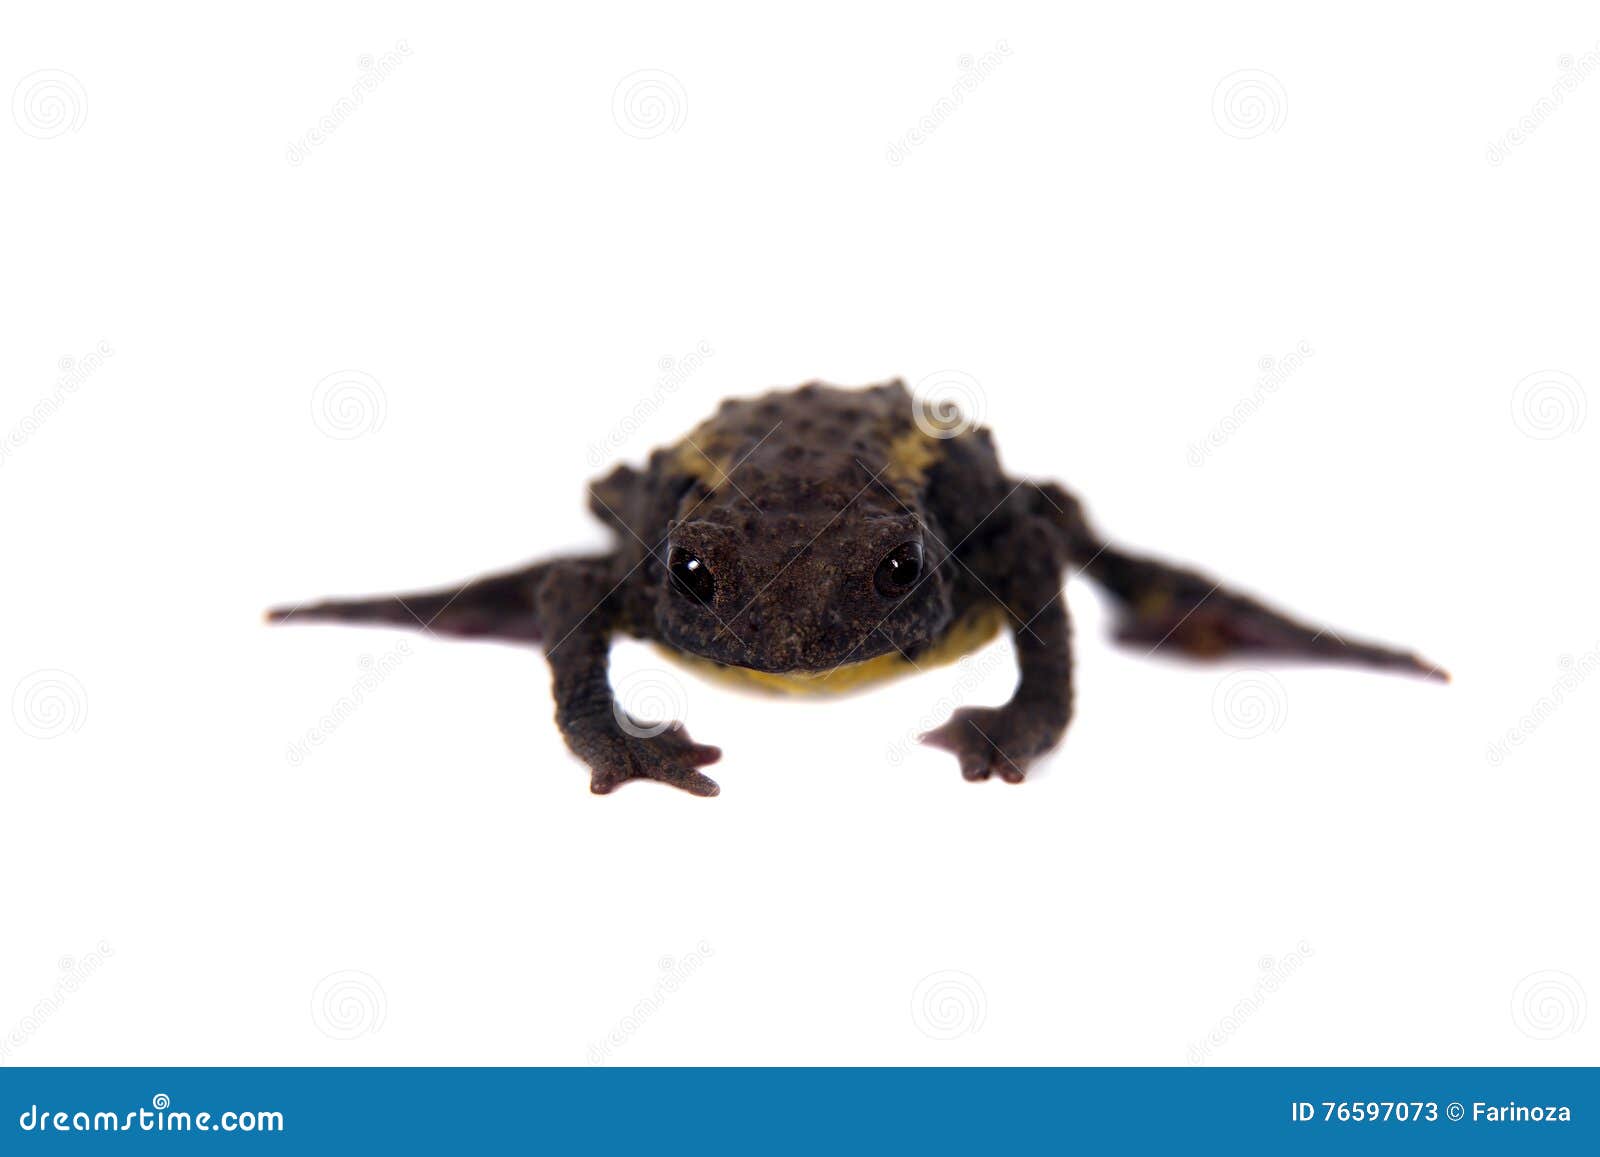 the guacamayo plump toad on white